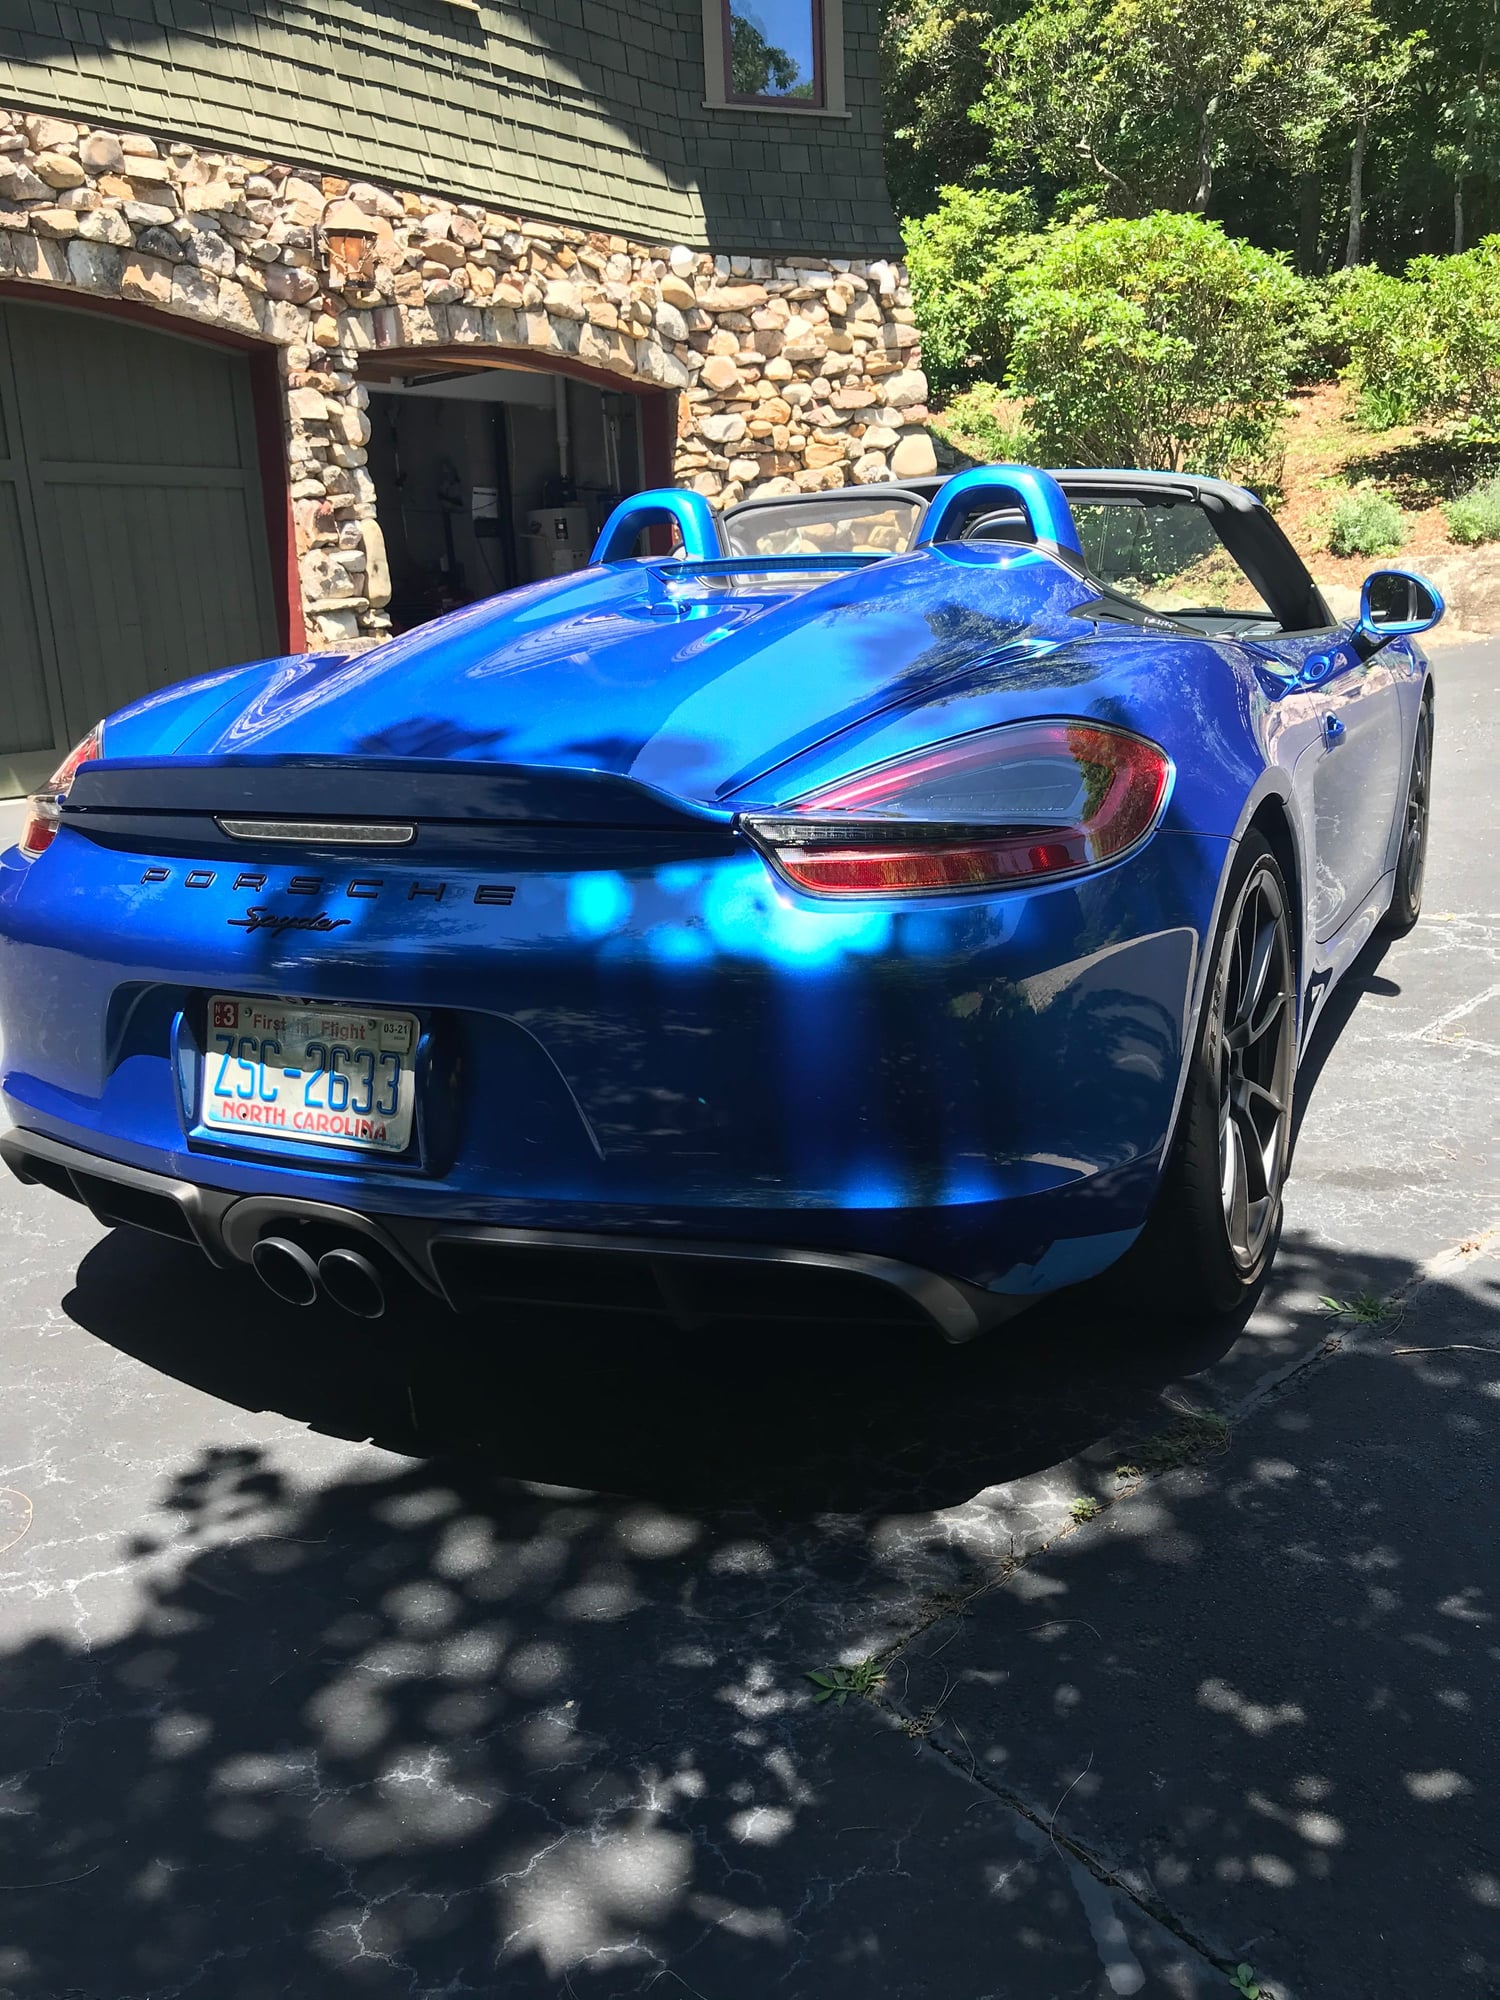 2016 Porsche Boxster - CPO 2016  Boxster Spyder - Used - VIN WP0CC2A84GS152091 - 8,200 Miles - 6 cyl - 2WD - Convertible - Blue - Asheville, NC 28730, United States